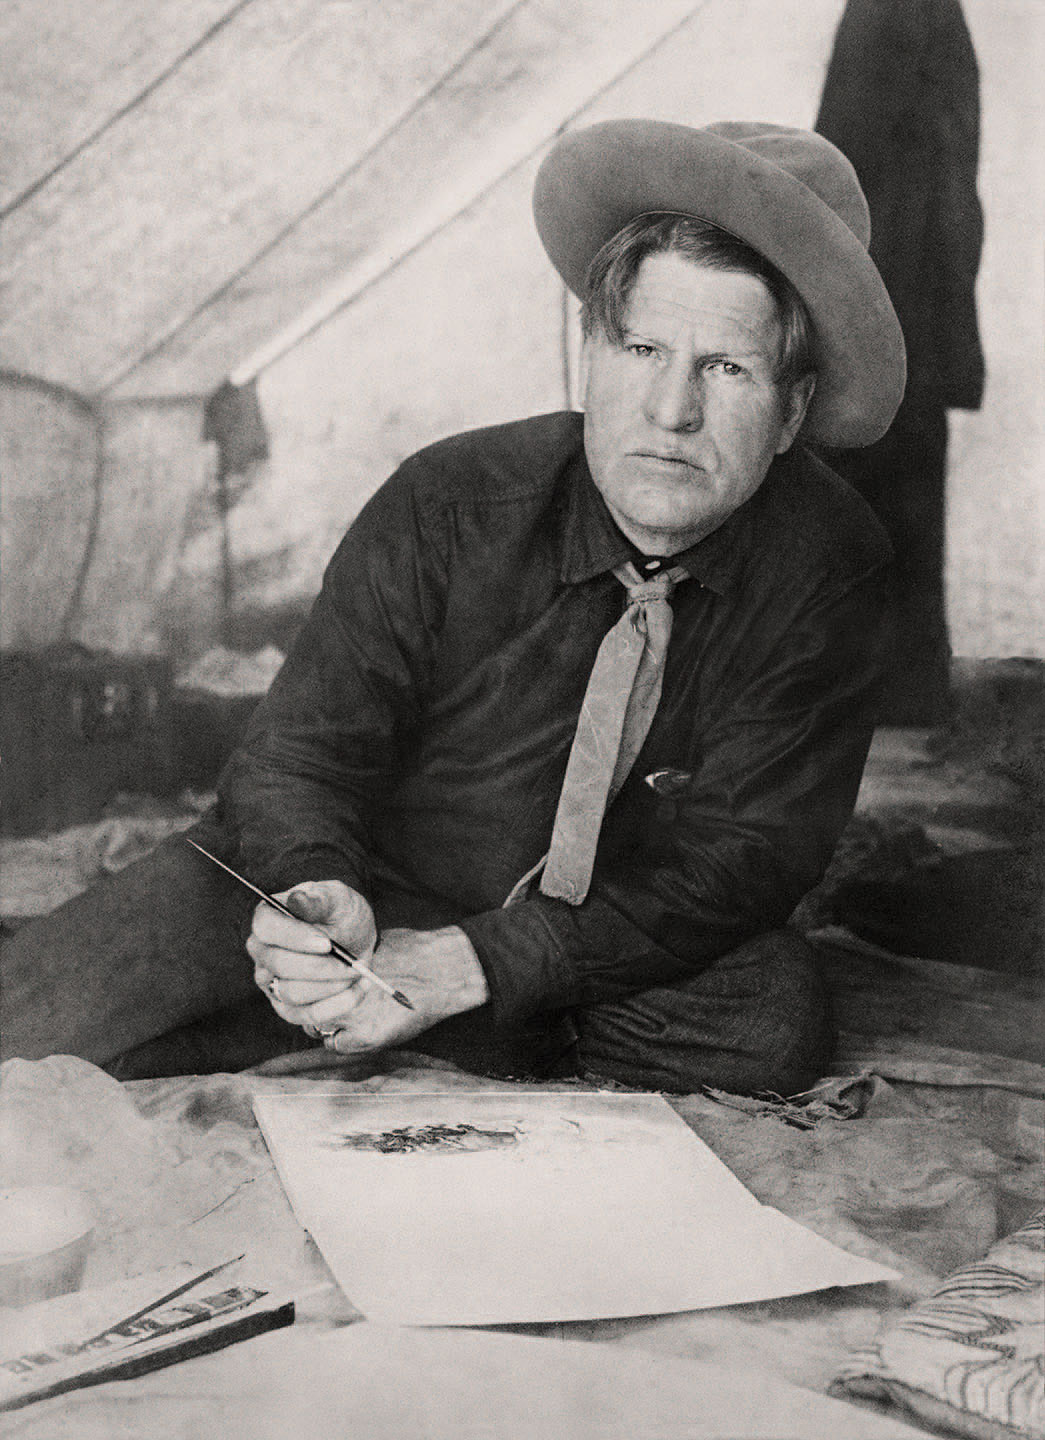 Photography: Russell Painting an Incident of the Buffalo Roundup by M.O. Hammond, 1909. Helen E. and Homer E. Britzman Collection, Gilcrease Museum Archives, University of Tulsa, Oklahoma.